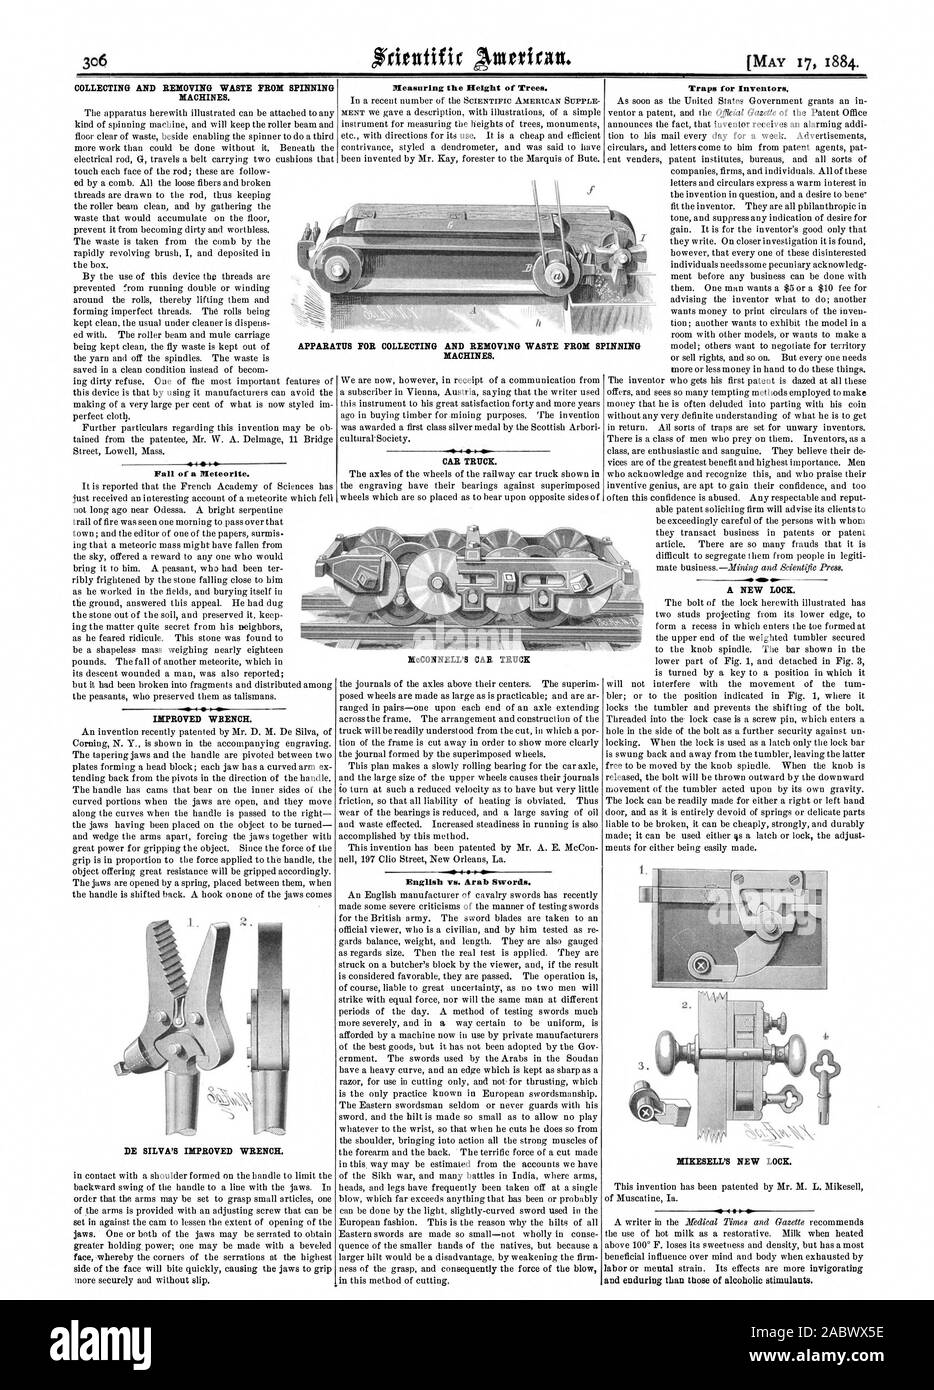 COLLECTING AND REMOVING WASTE FROM SPINNING MACHINES. Fall of a Meteorite. Measuring the Height of Trees. CAR TRUCK. Traps for Inventors. APPARATUS FOR COLLECTING AND REMOVING WASTE FROM 8 MACHINES. PINNING IMPROVED WRENCH. DE SILVA'S IMPROVED WRENCH. English vs. Arab Swords. MIKESELL'S NEW LOCK., scientific american, 1884-05-17 Stock Photo